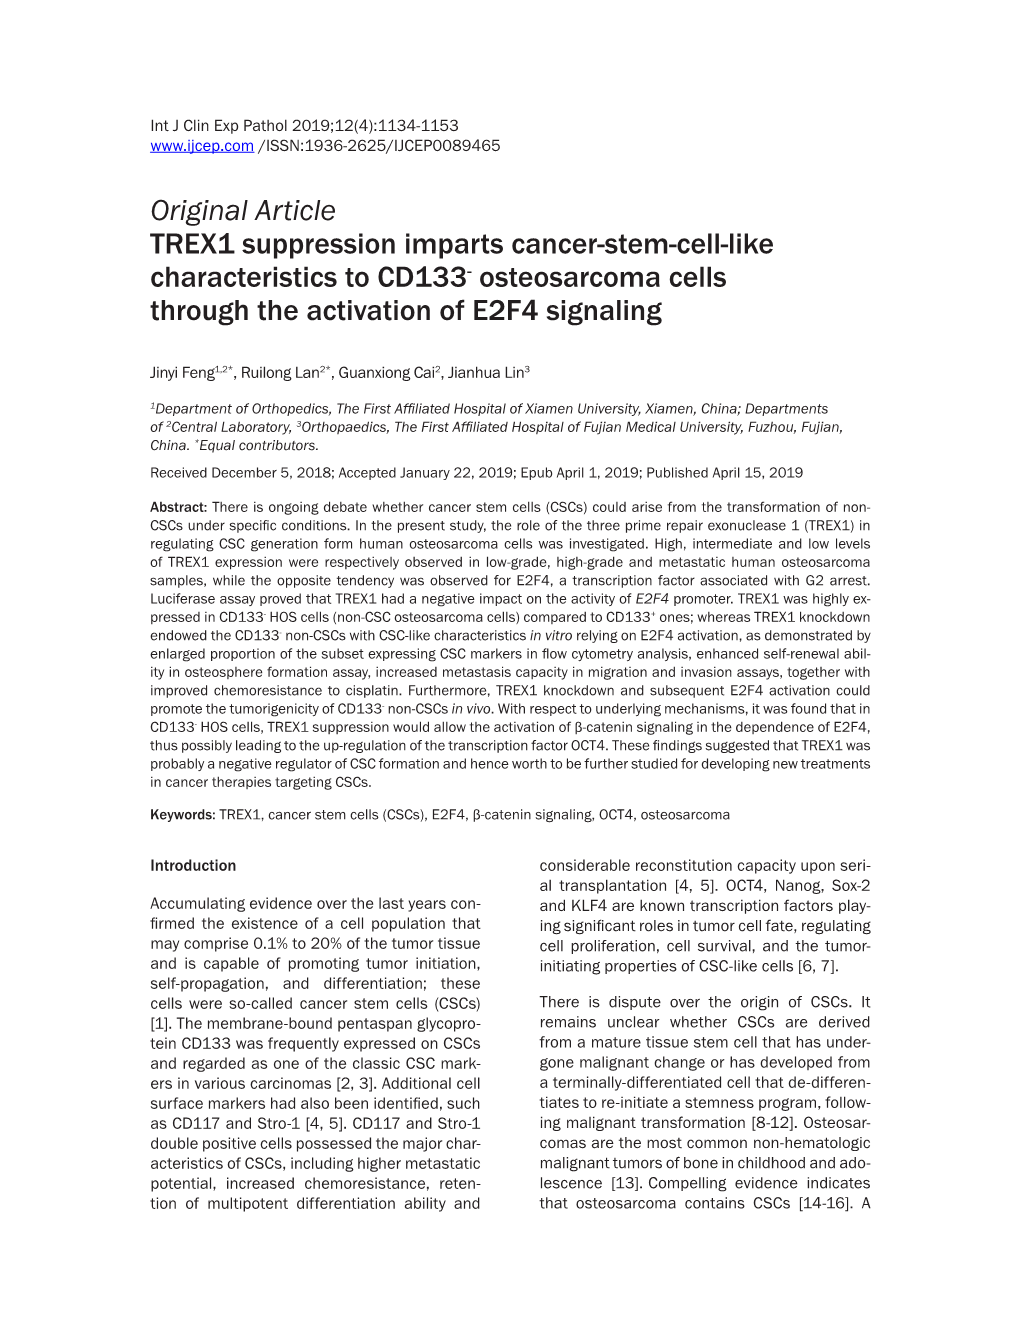 Original Article TREX1 Suppression Imparts Cancer-Stem-Cell-Like Characteristics to CD133- Osteosarcoma Cells Through the Activation of E2F4 Signaling